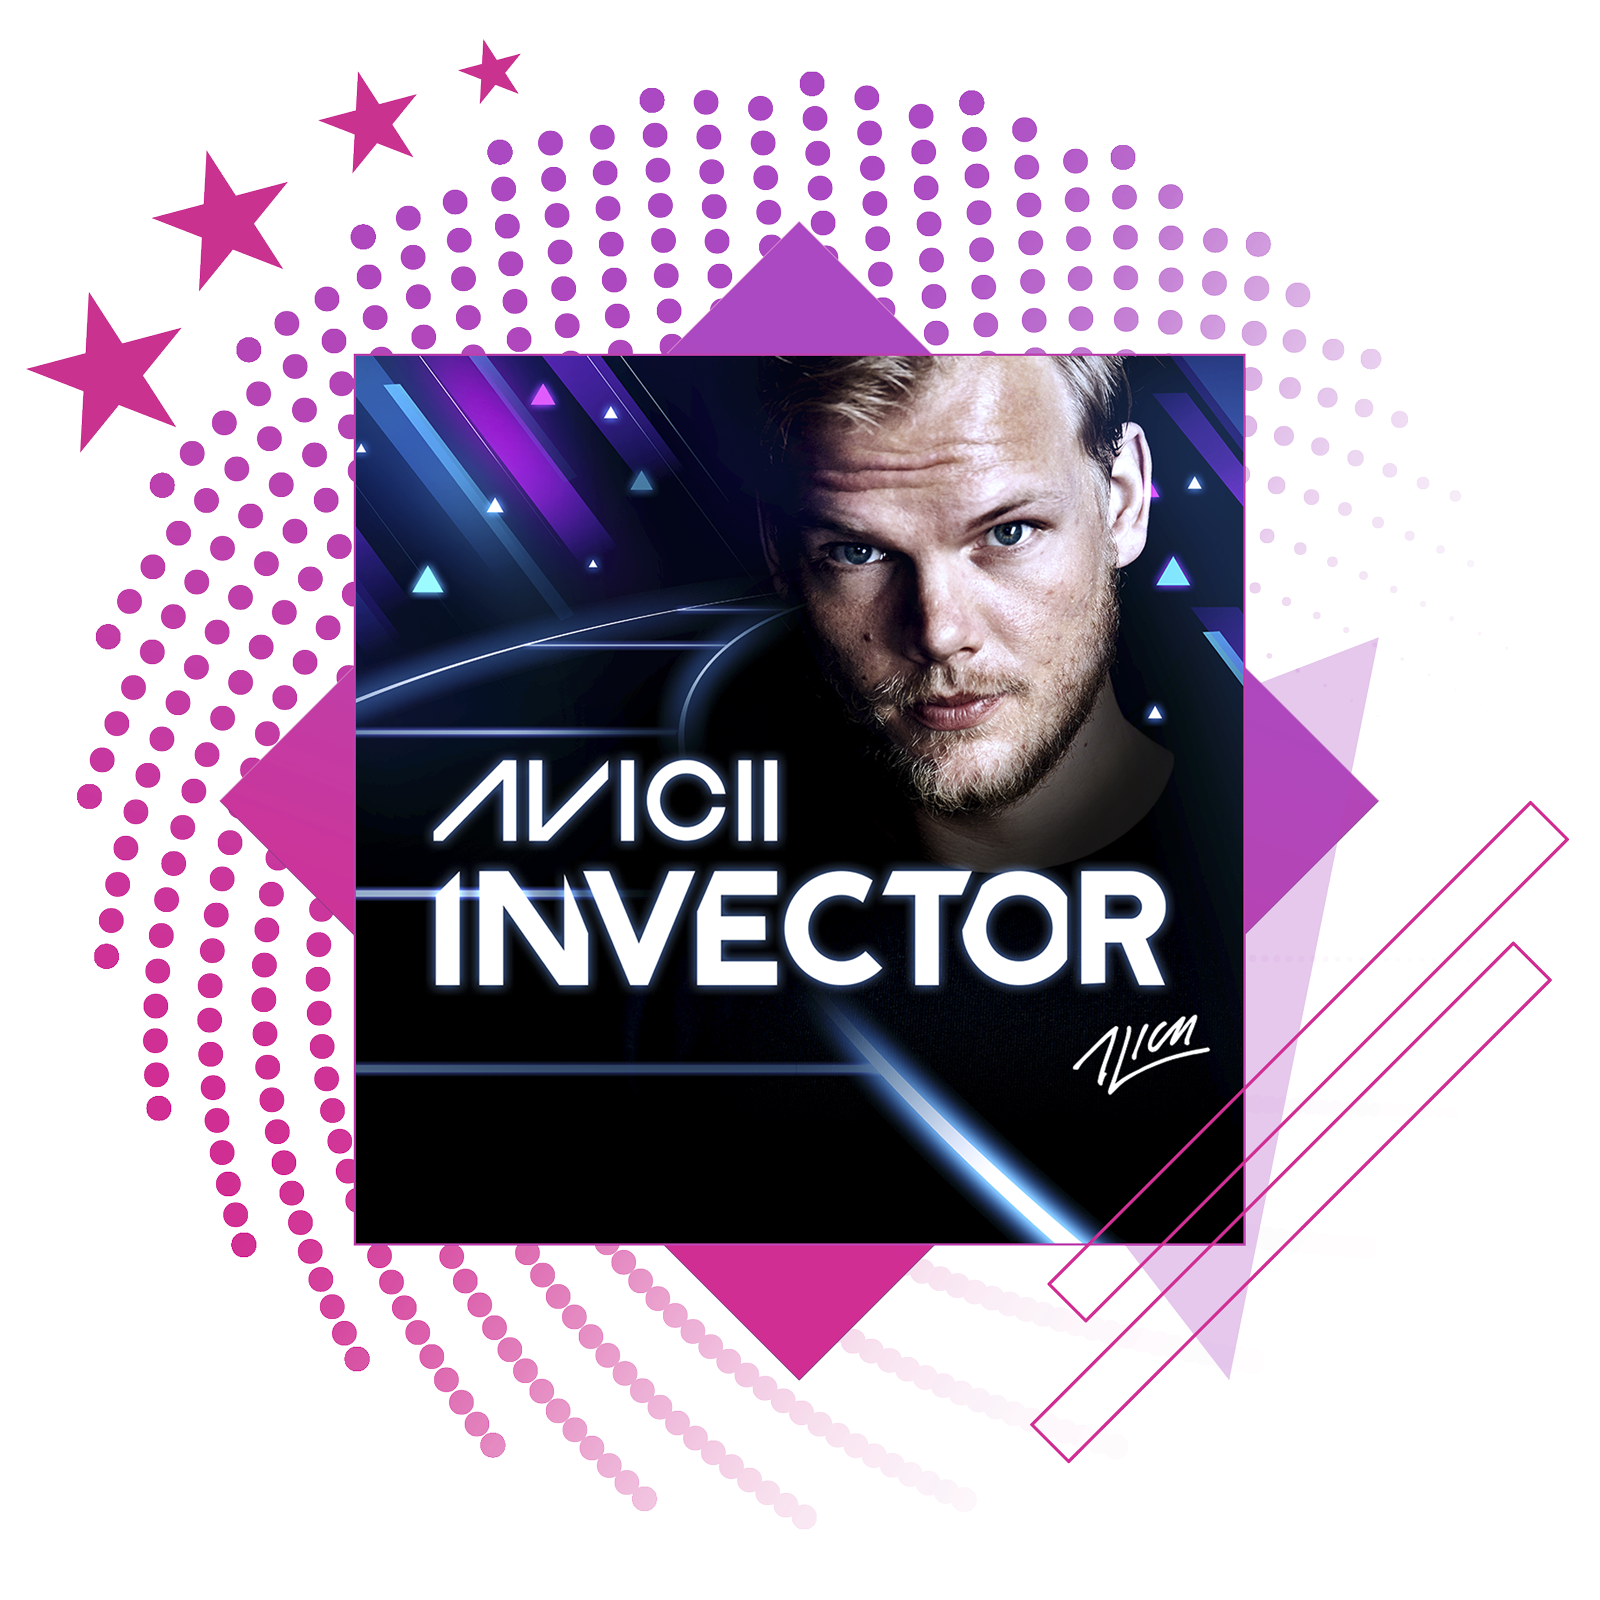 Best rhythm games feature image, featuring key art from Aviici: Invector.